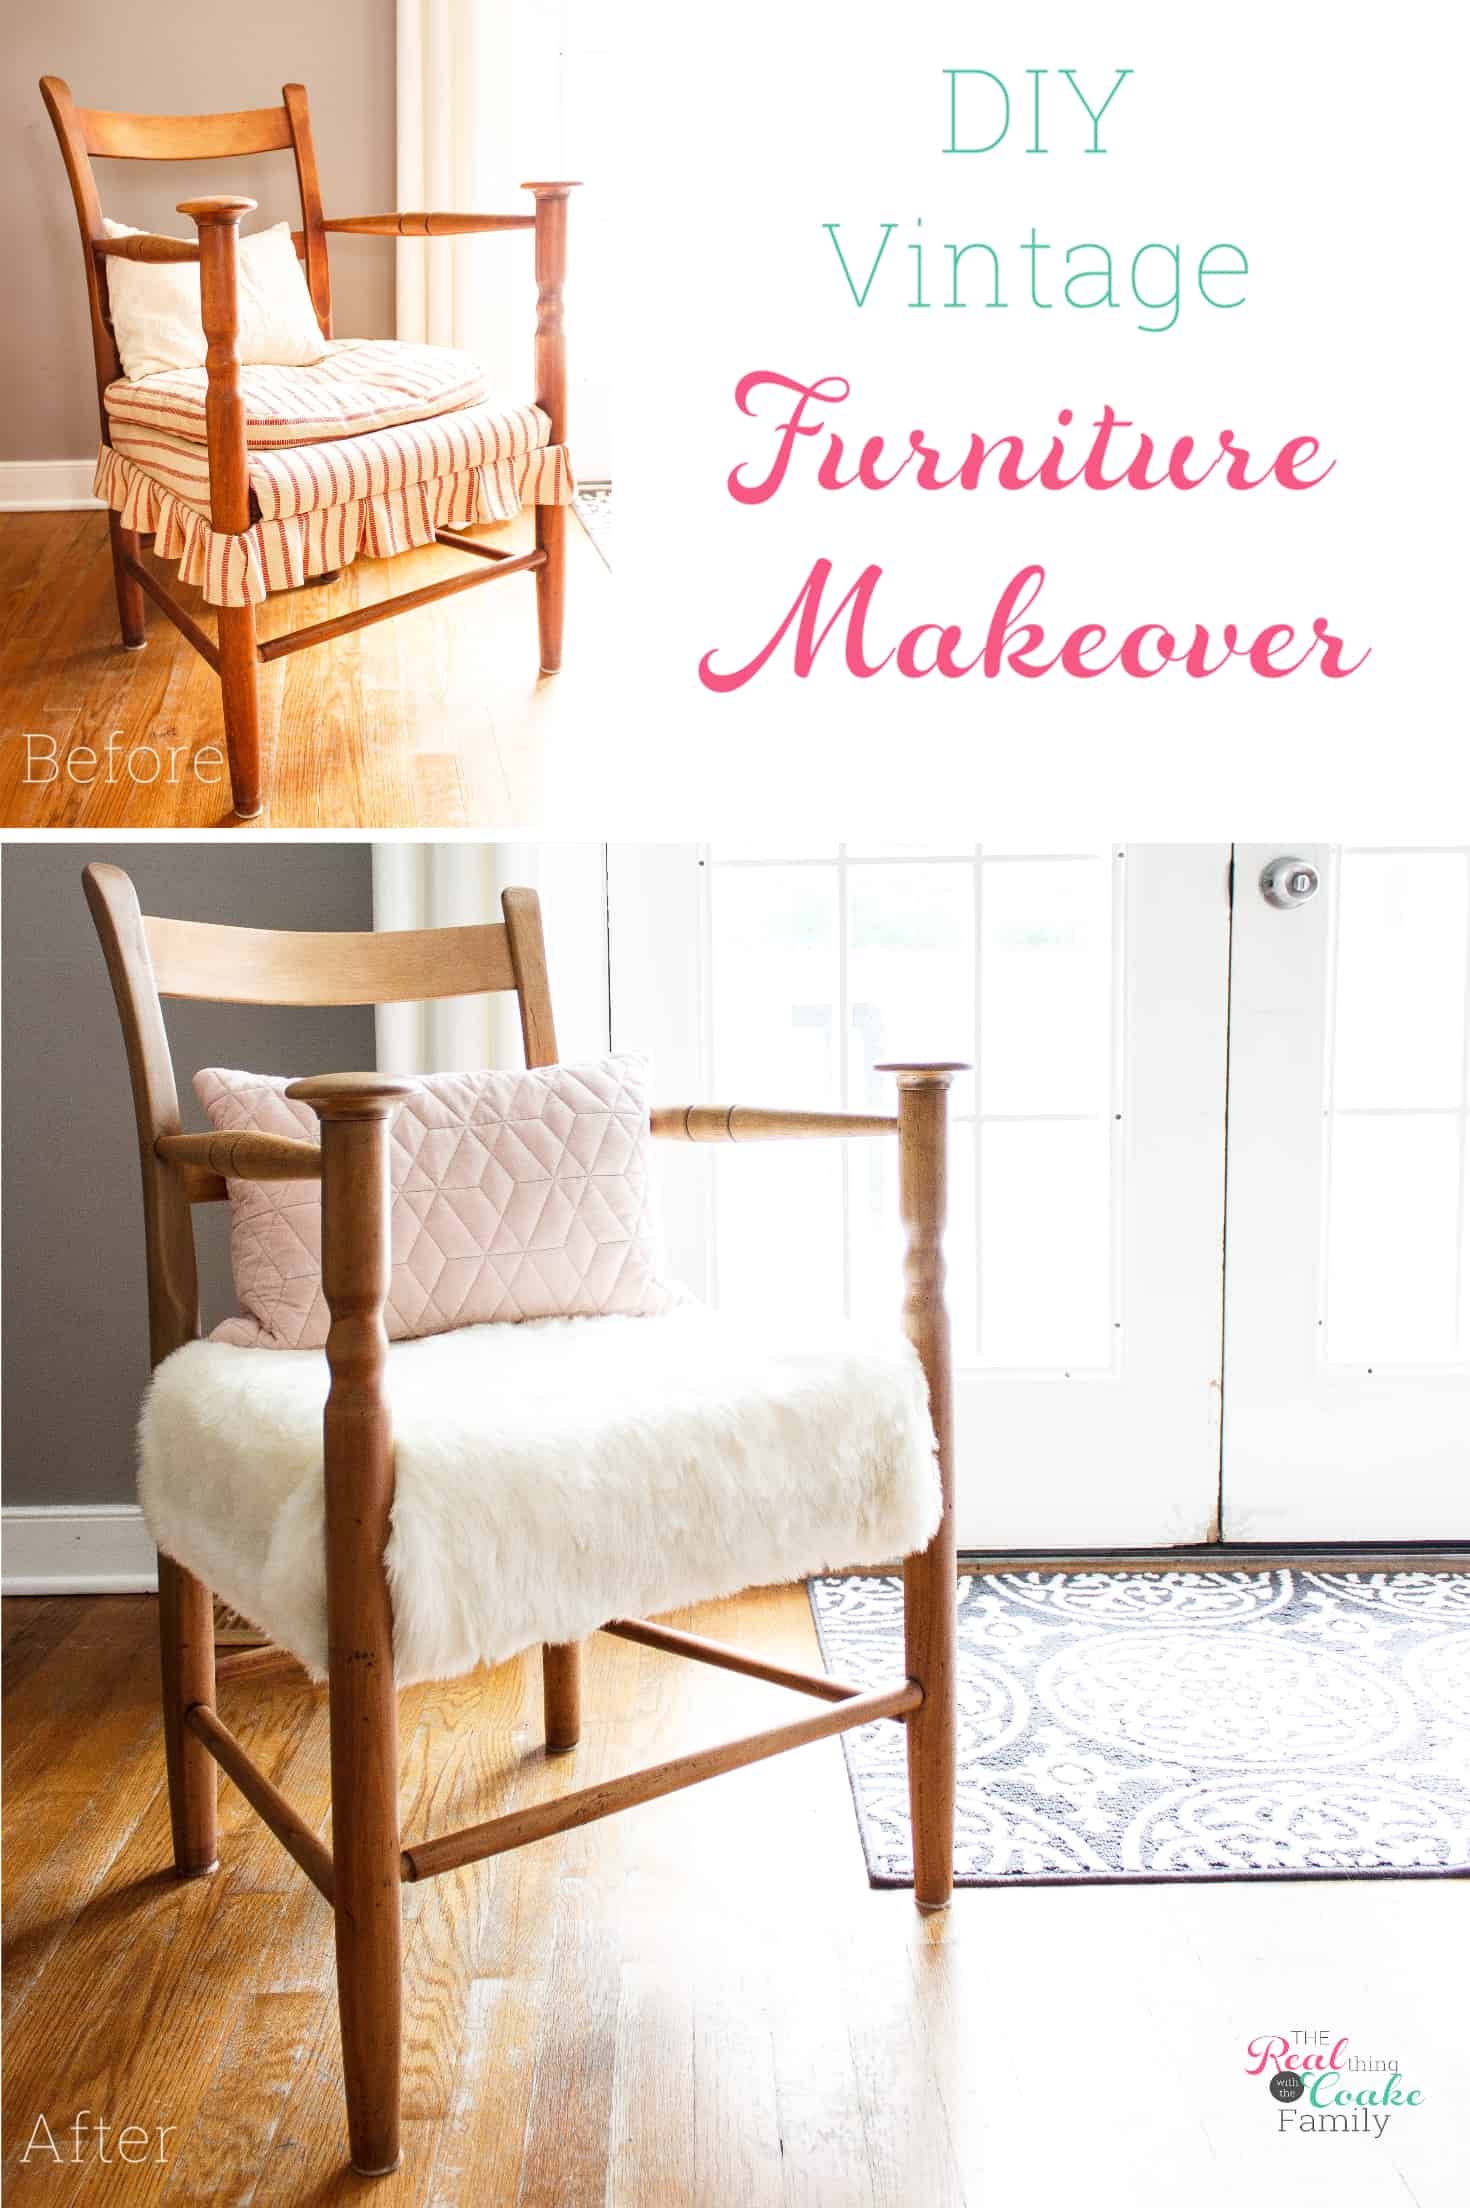 How to Refinish Furniture - DIY Chair Makeover - Real Creative